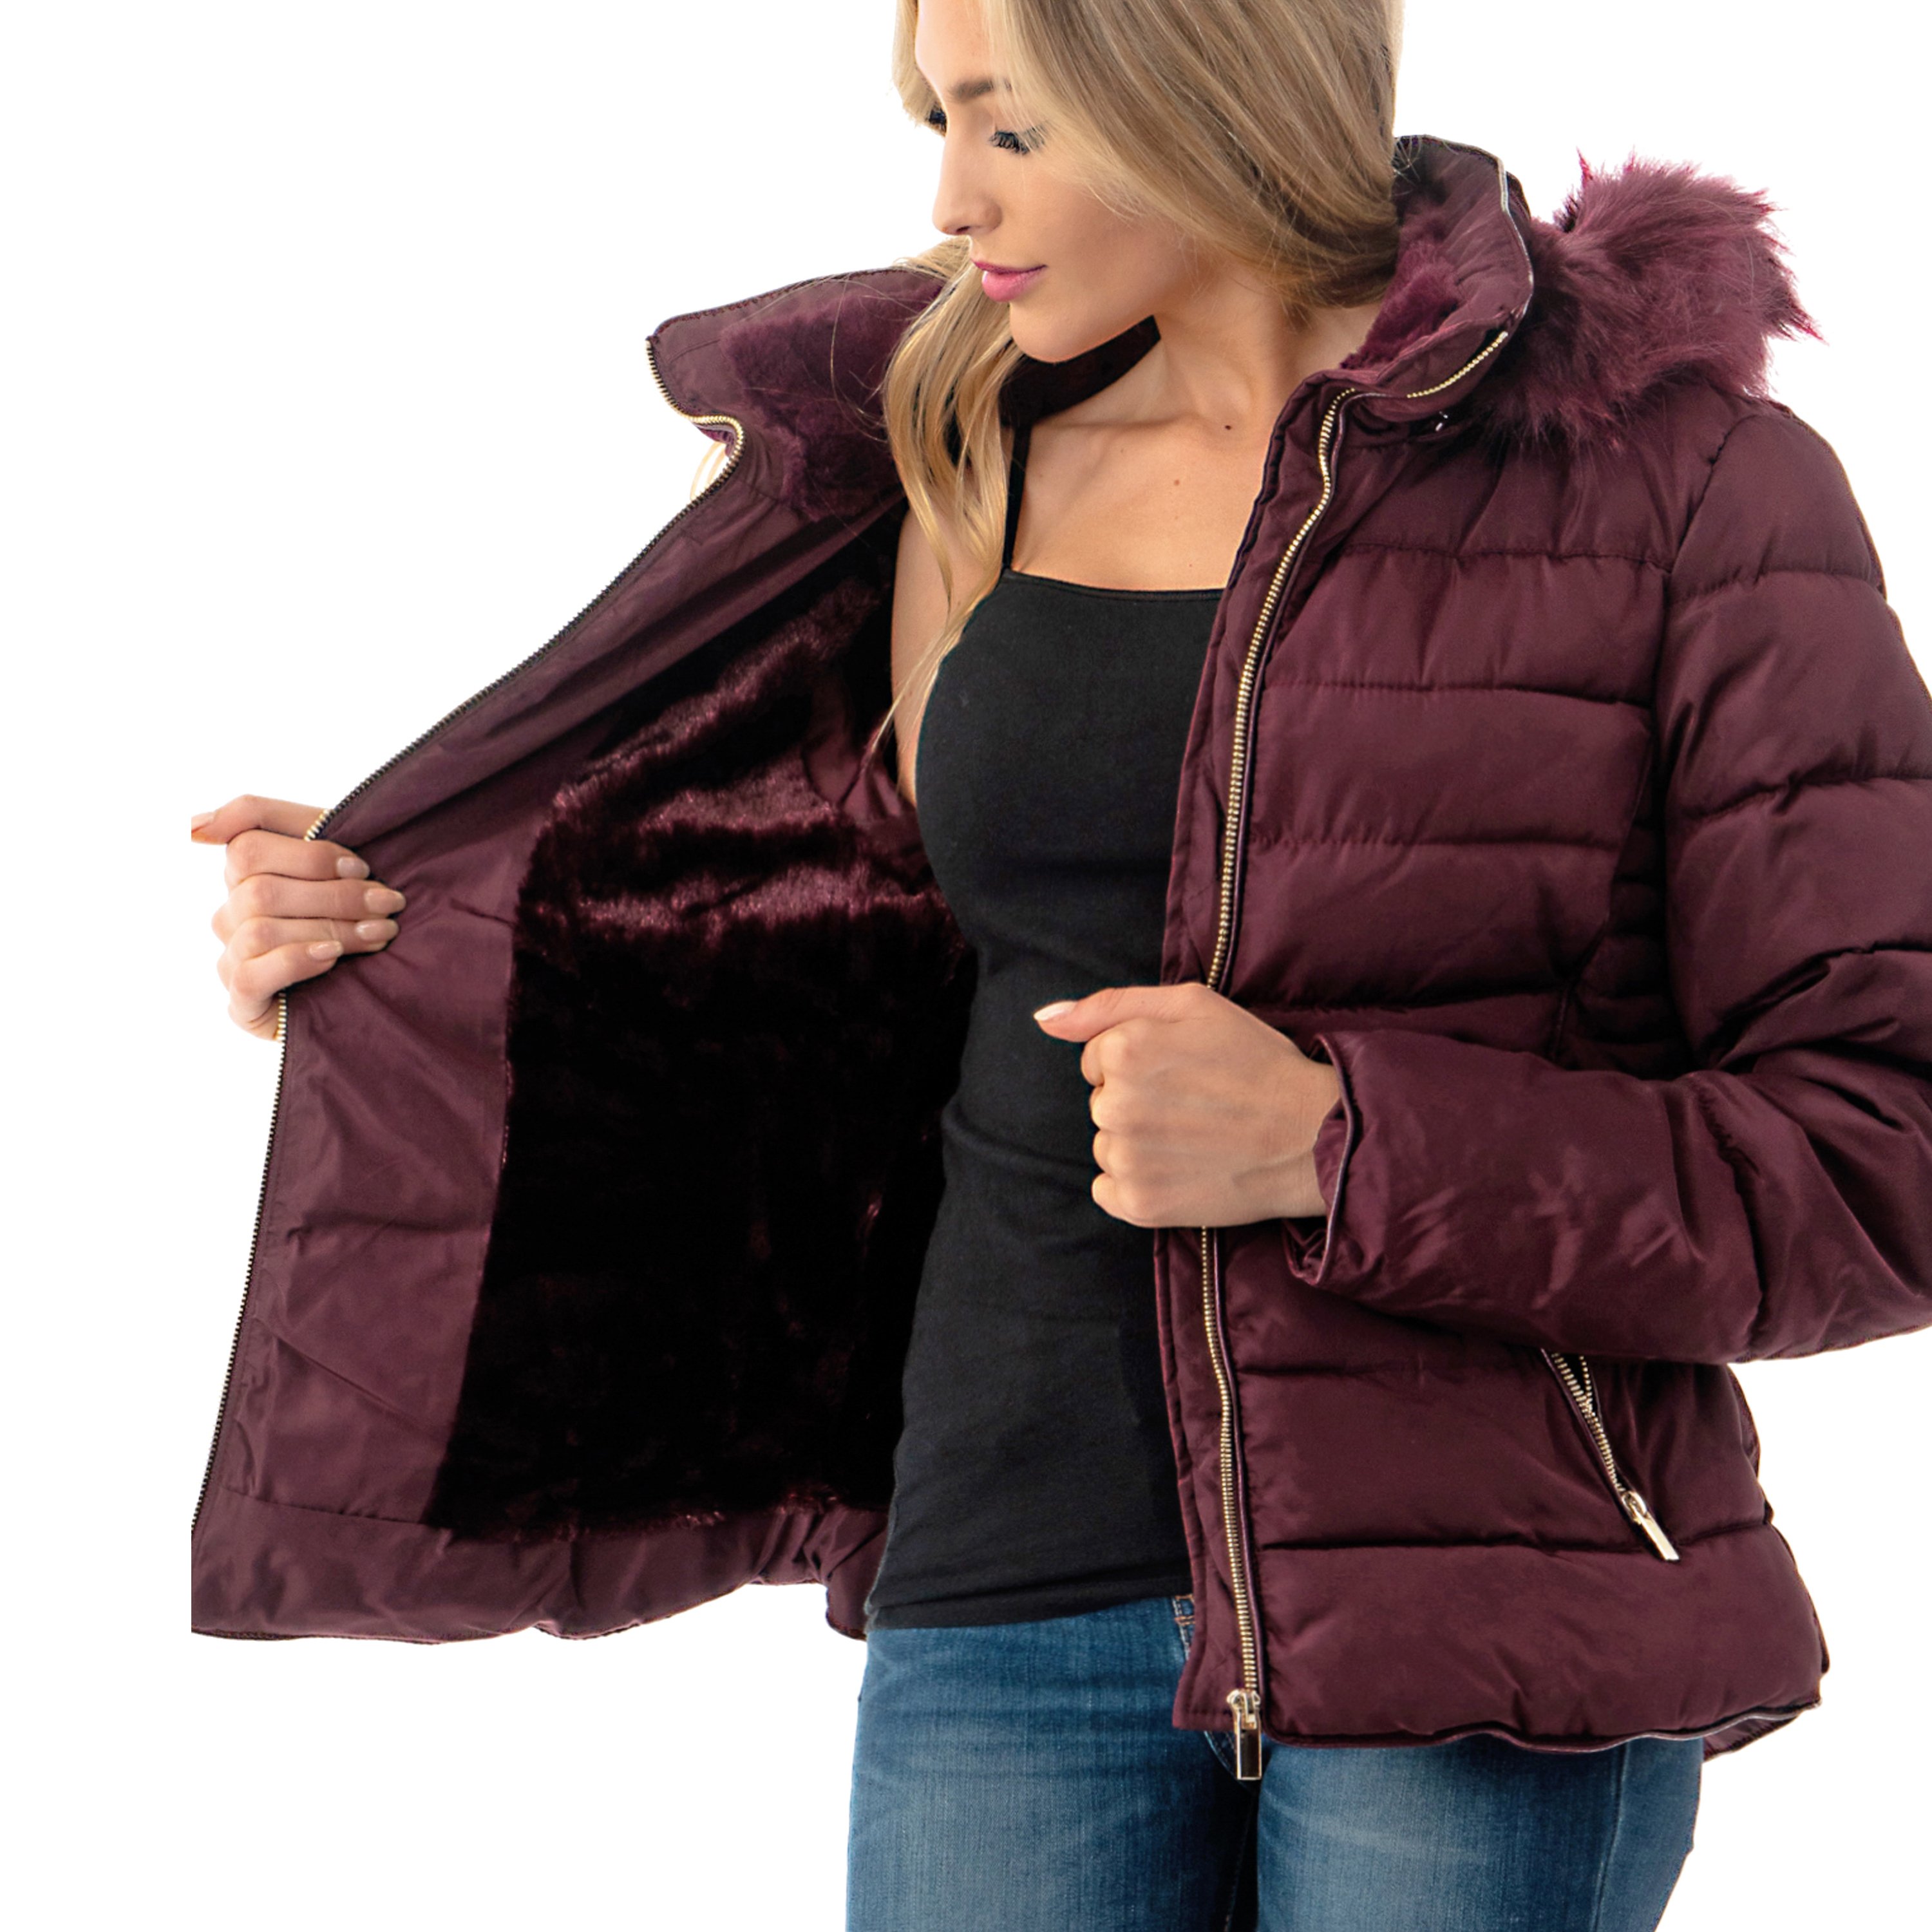 Fashionazzle Women's Short Puffer Coat with Removable Faux Fur Trim Hood Jacket - image 4 of 14